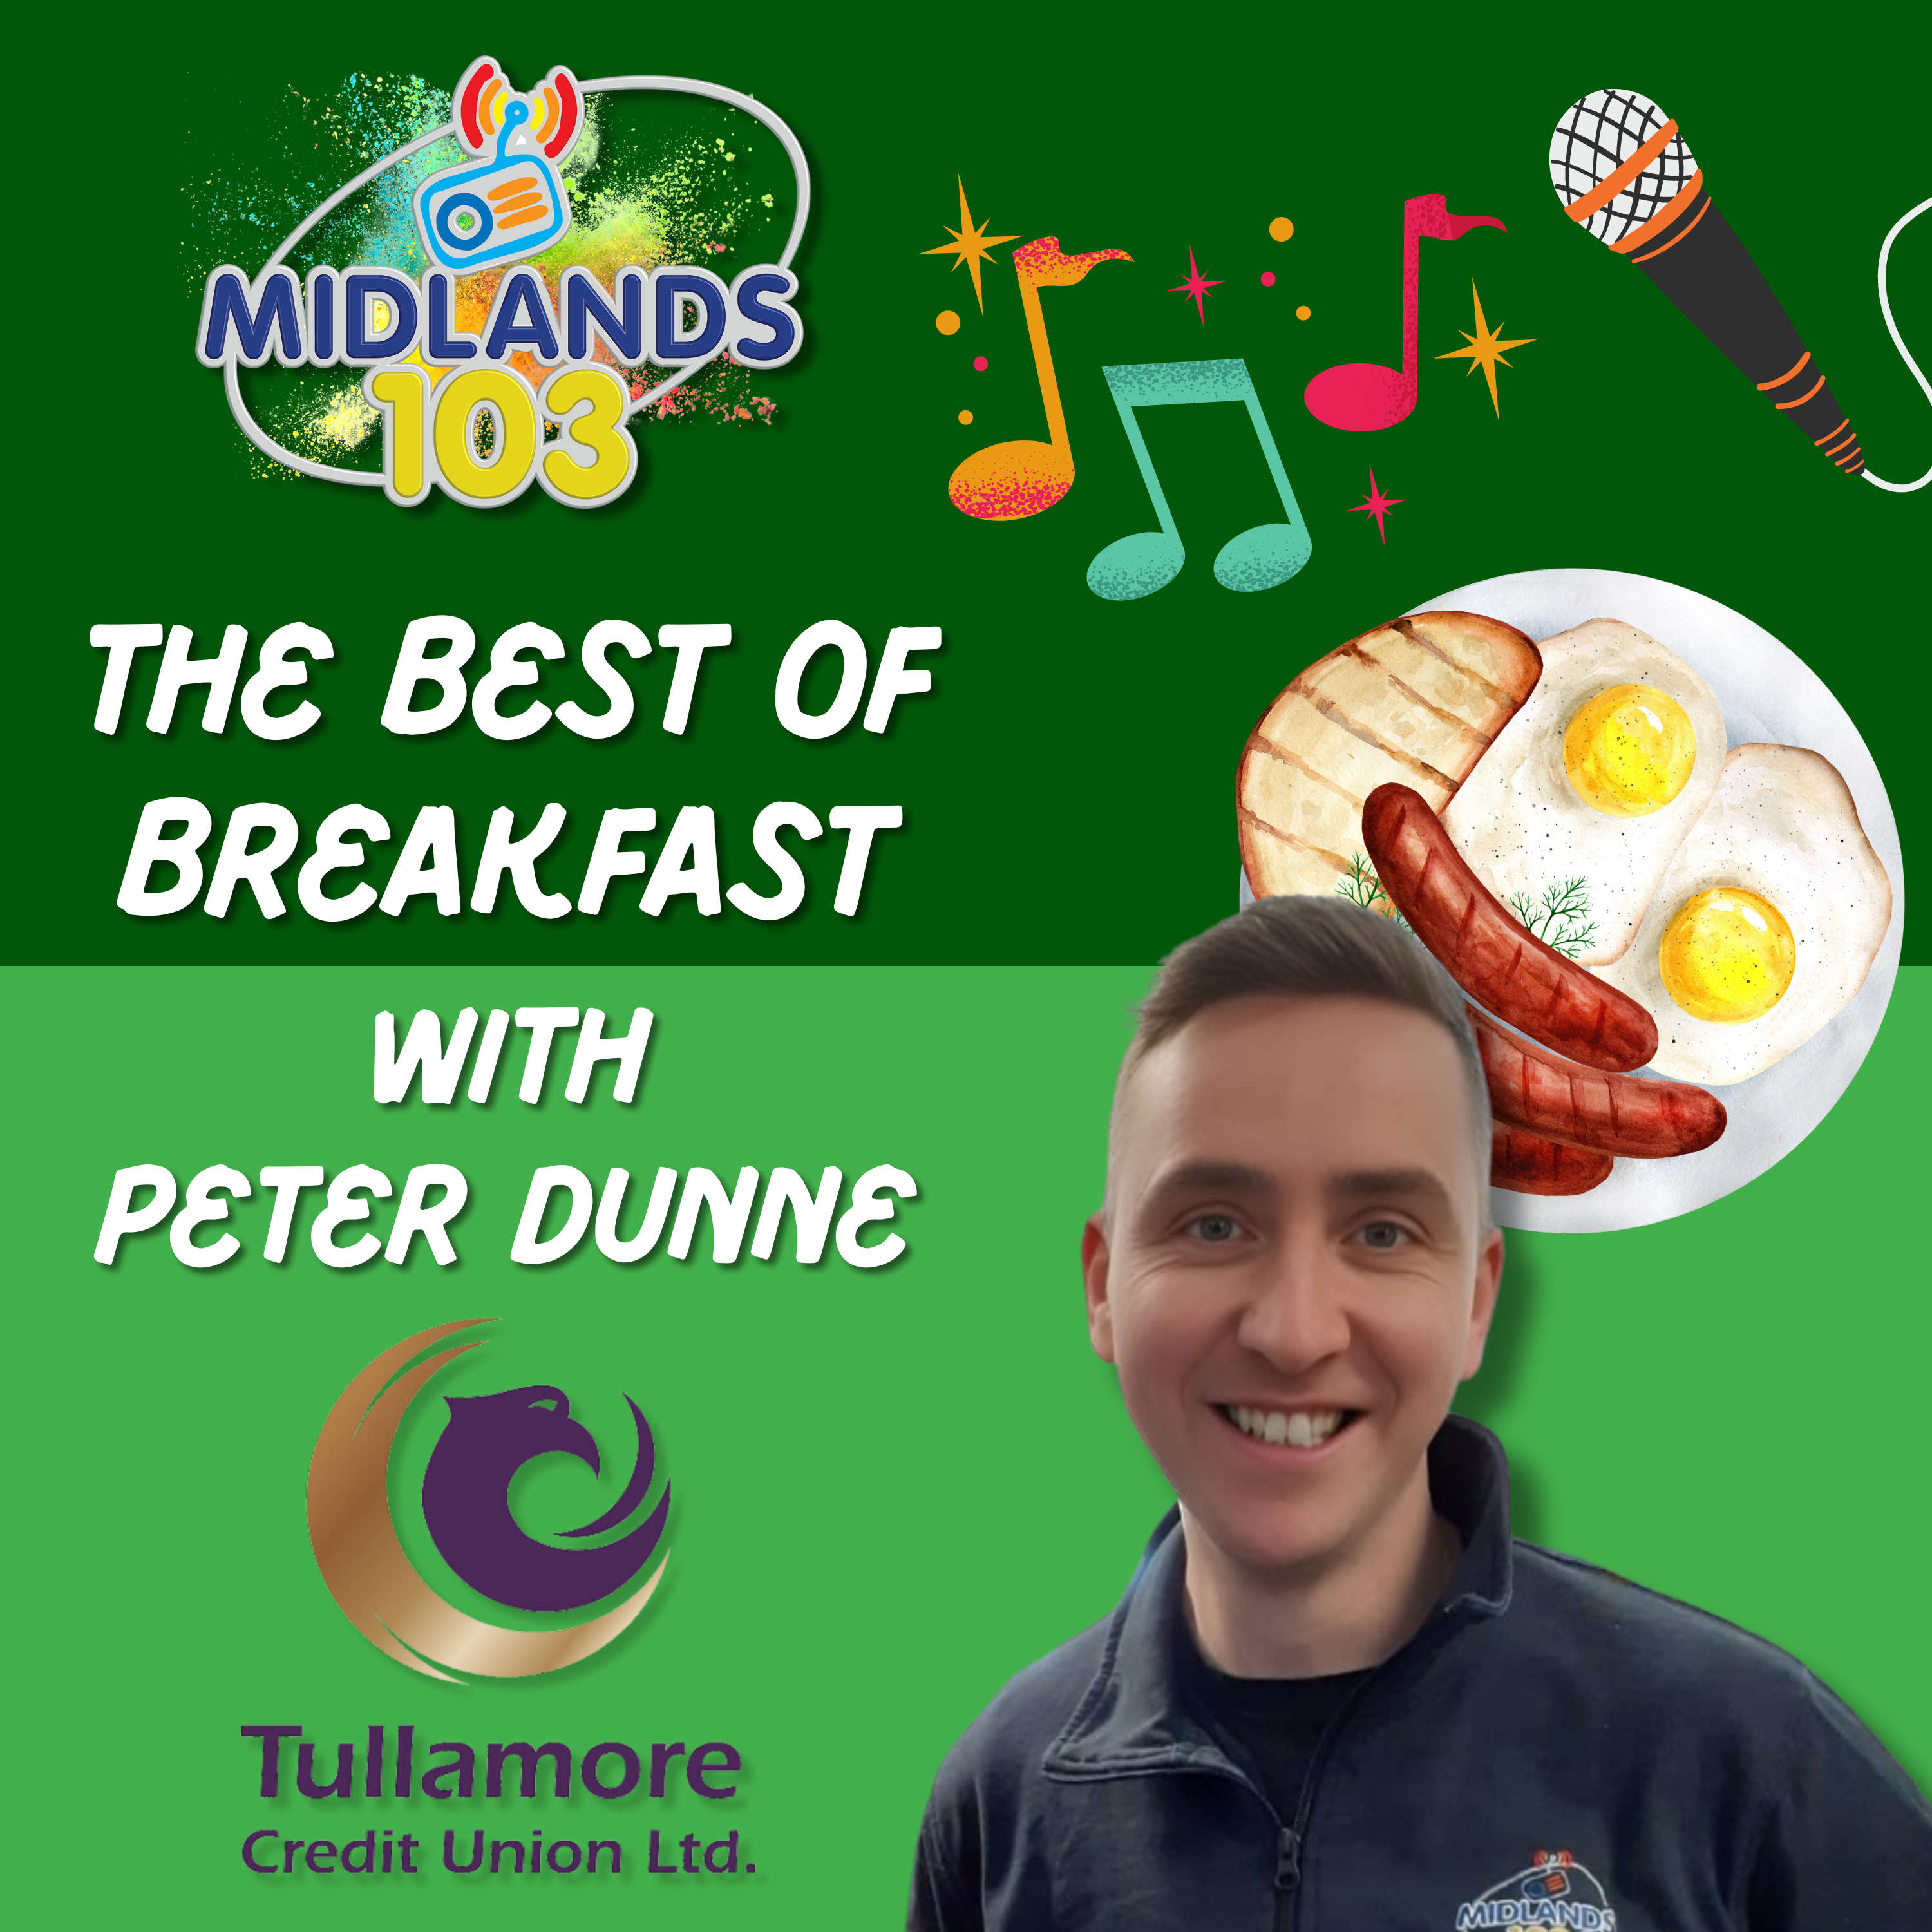 The Best of Breakfast with Peter Dunne 